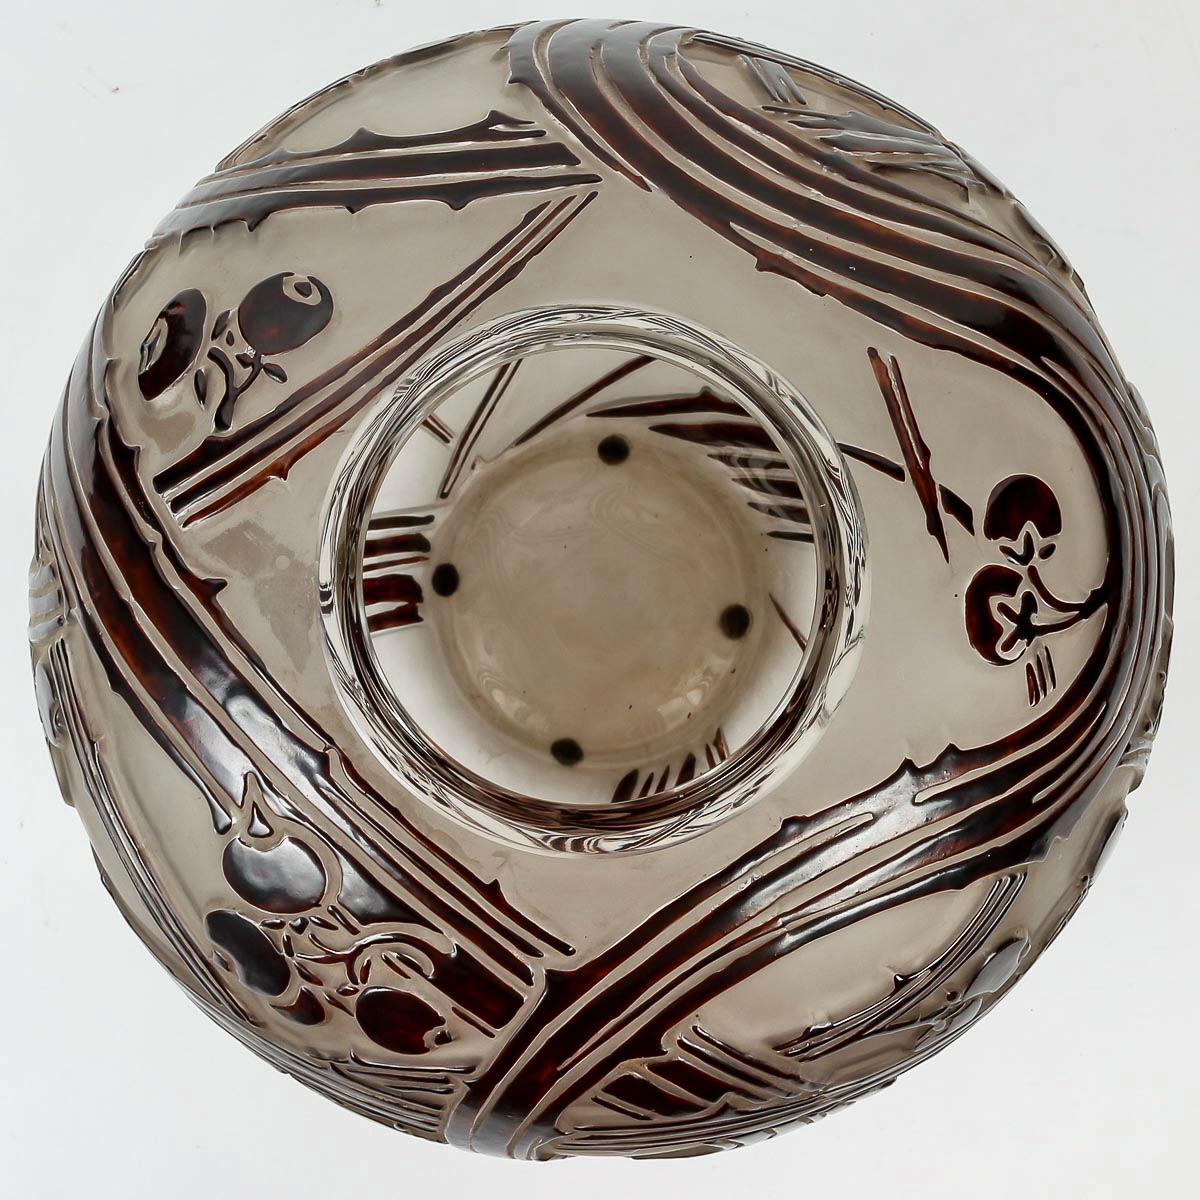 Molded 1924 Rene Lalique Vase Baies Frosted Glass with Brown Enamel For Sale